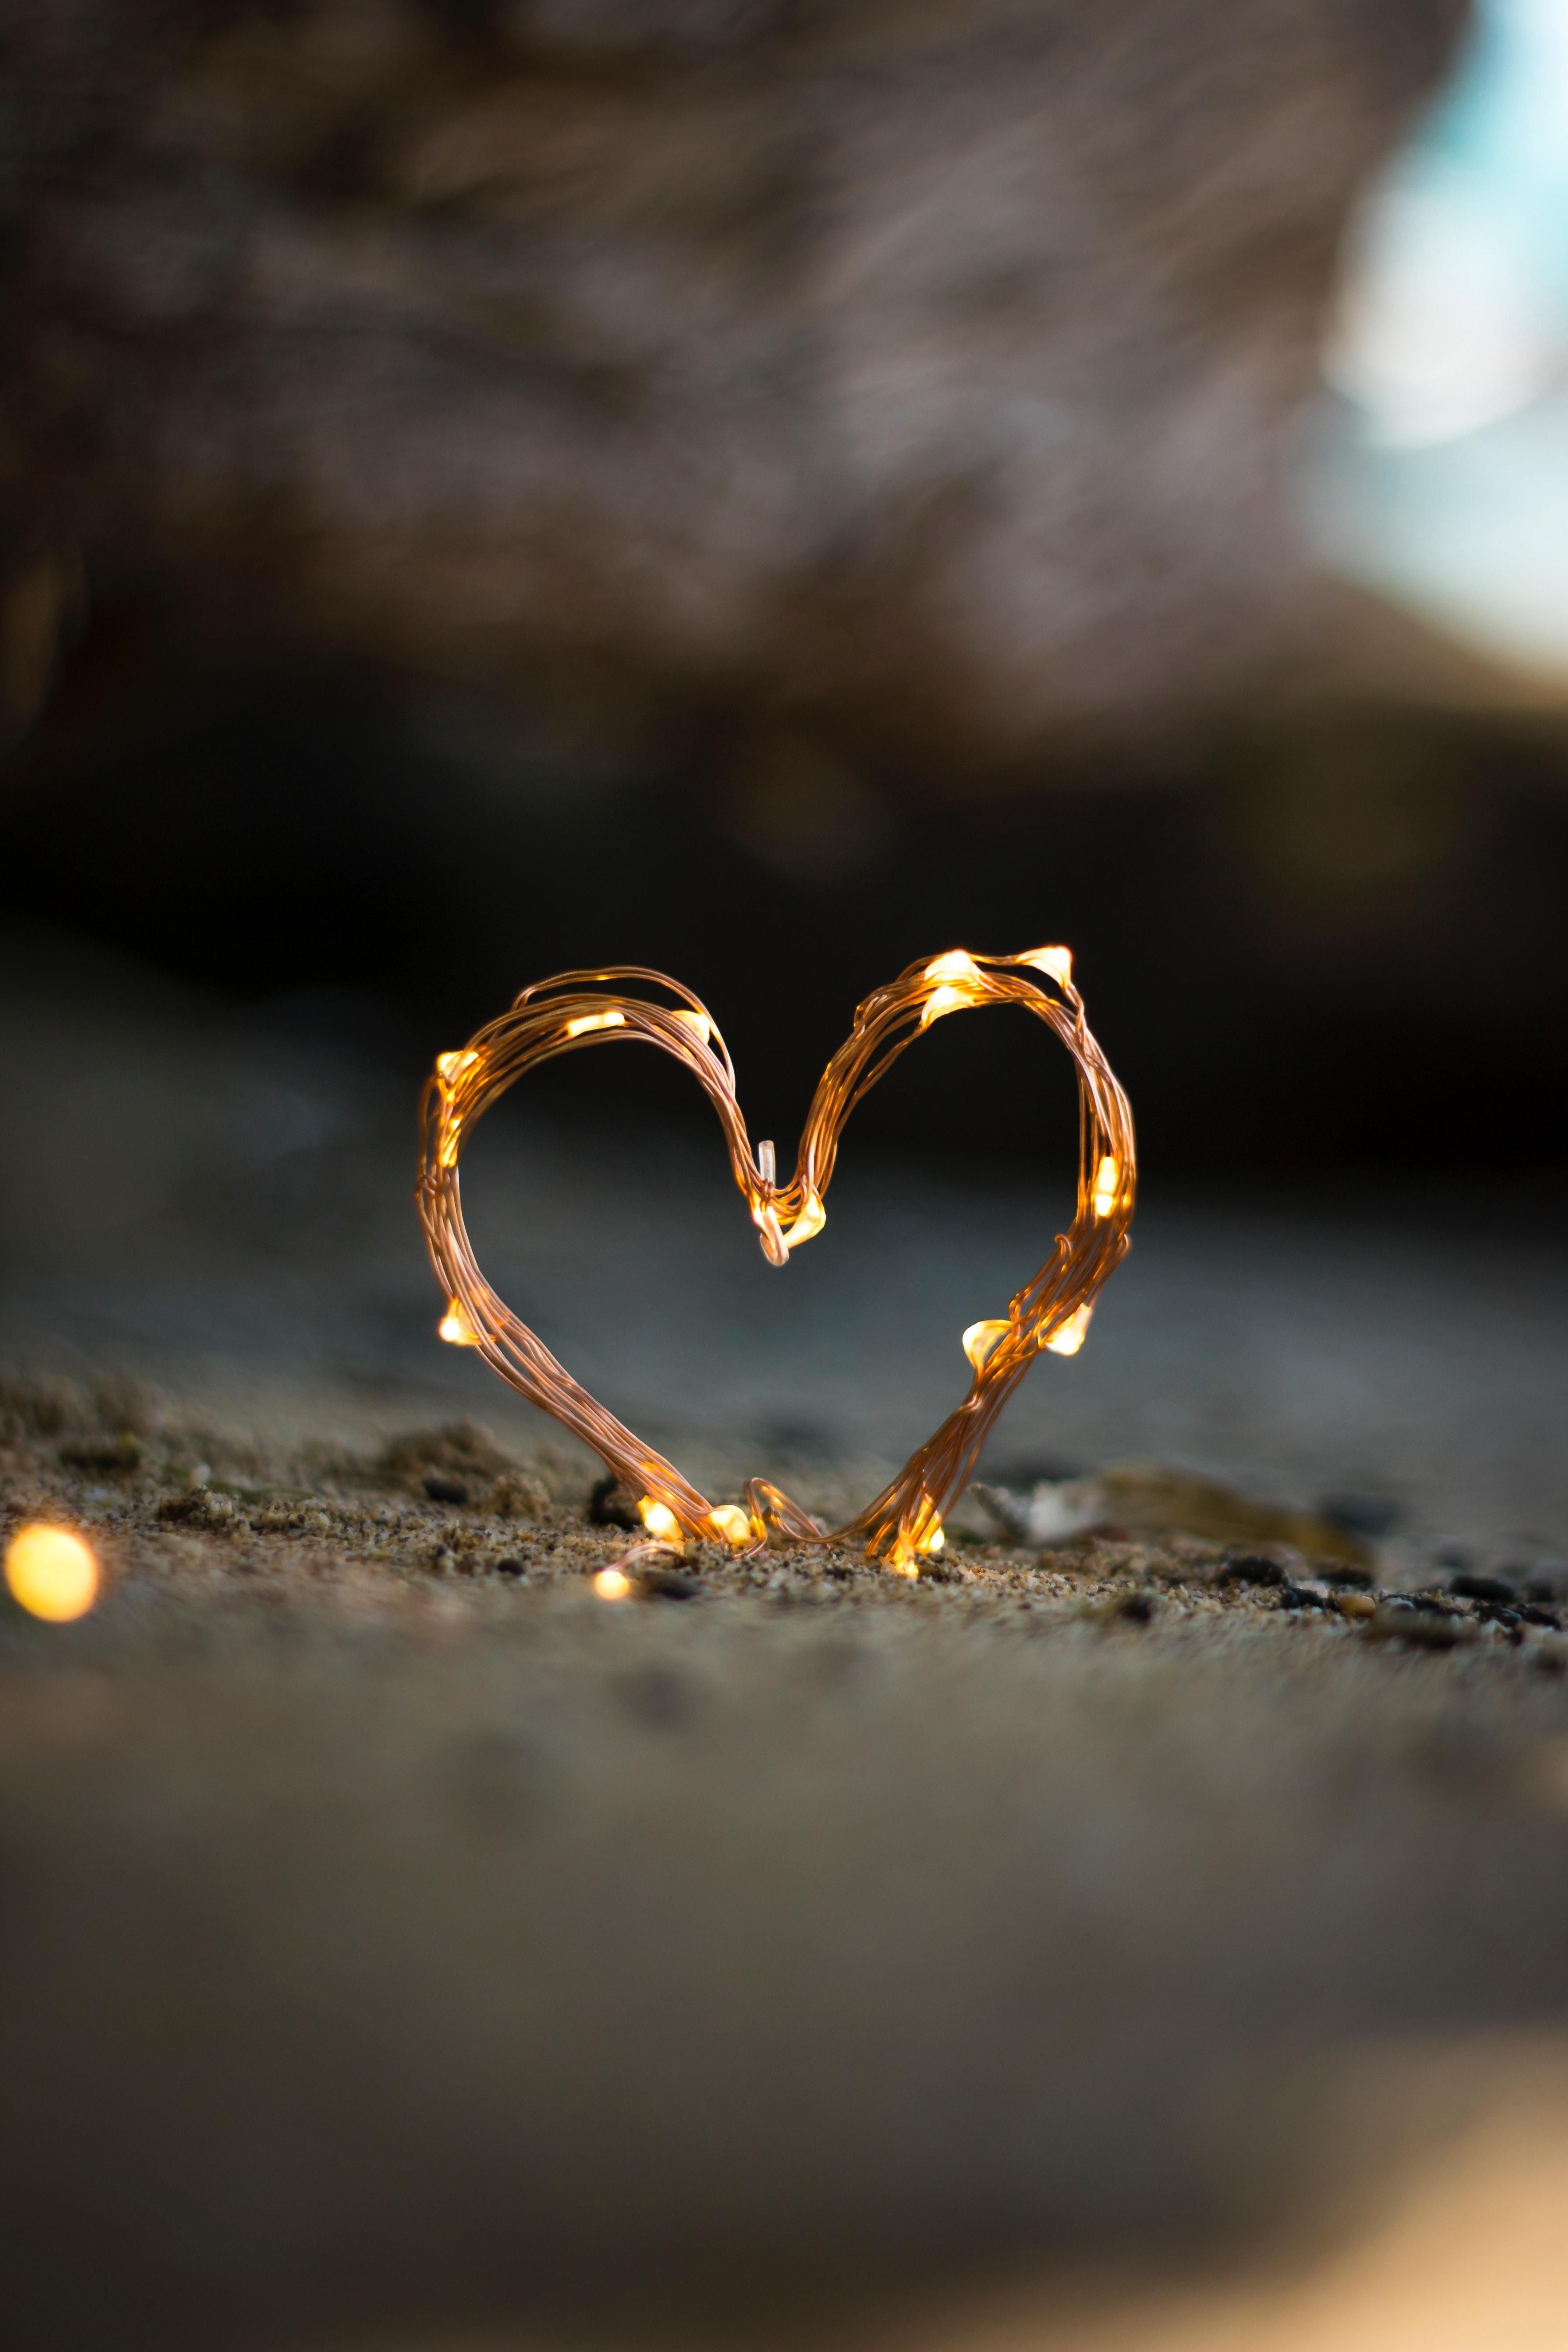 The Heart of Valentine's Day: Celebrating God's Unconditional Love